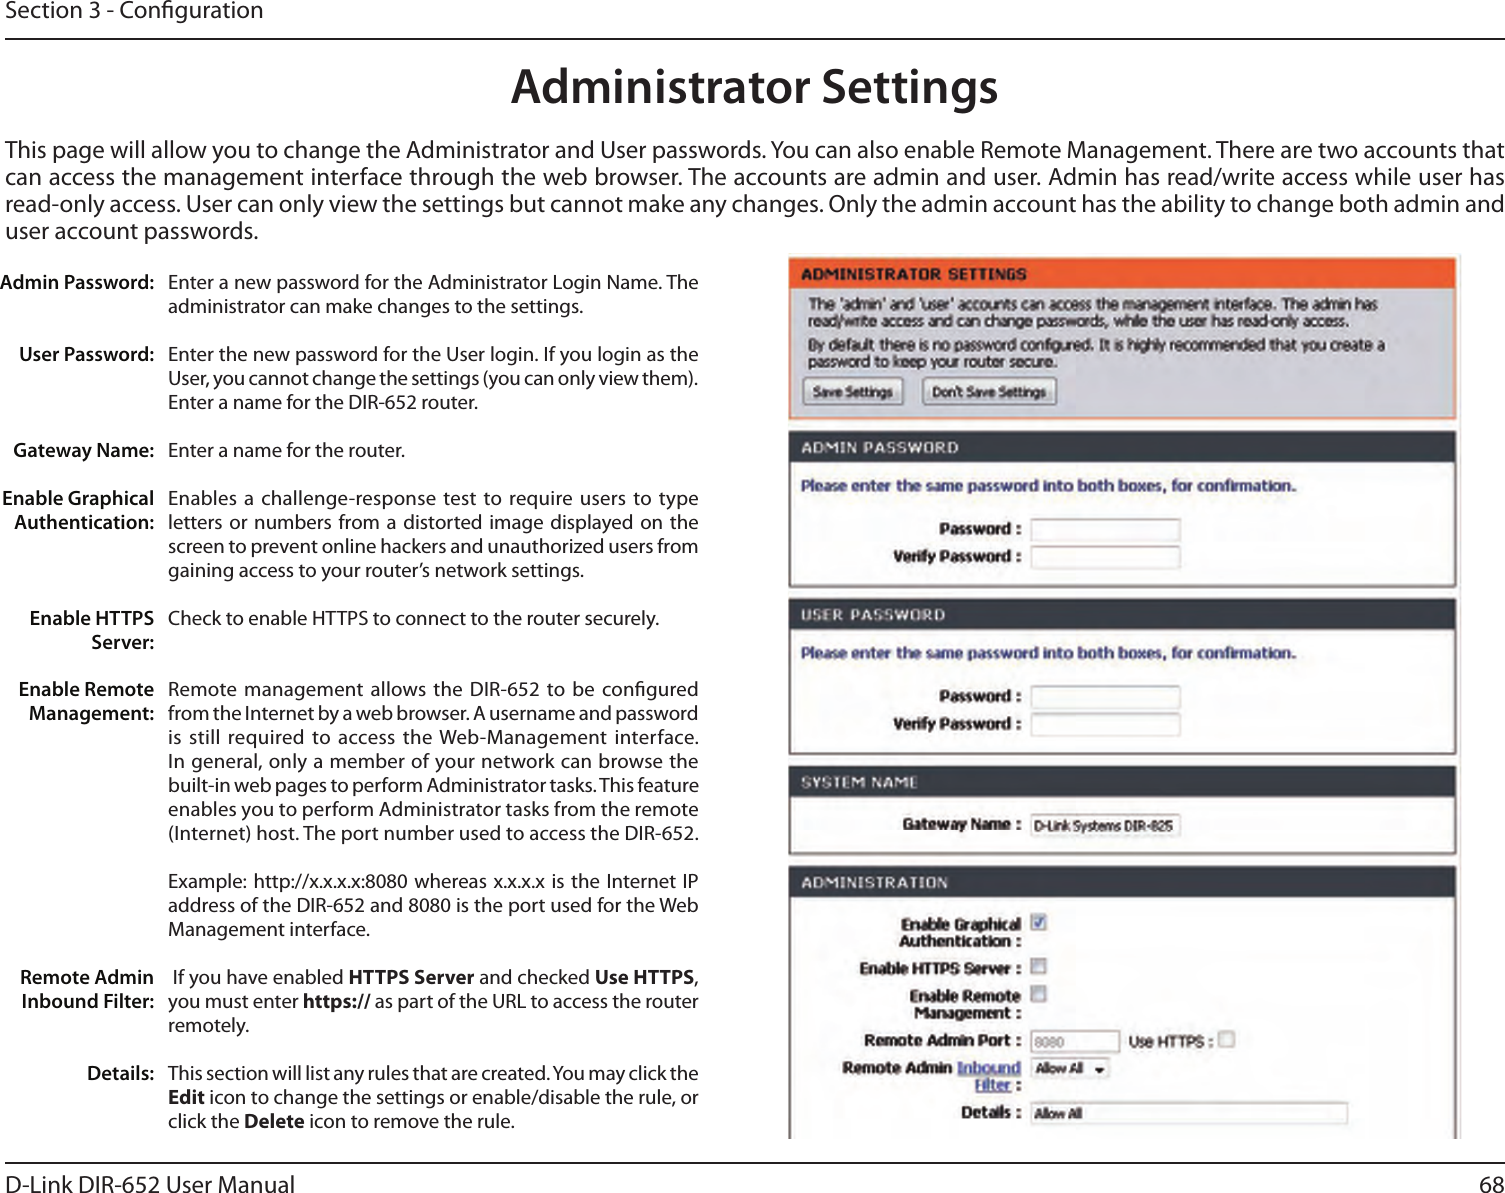 68D-Link DIR-652 User ManualSection 3 - CongurationAdministrator SettingsThis page will allow you to change the Administrator and User passwords. You can also enable Remote Management. There are two accounts that can access the management interface through the web browser. The accounts are admin and user. Admin has read/write access while user has read-only access. User can only view the settings but cannot make any changes. Only the admin account has the ability to change both admin and user account passwords.Enter a new password for the Administrator Login Name. The administrator can make changes to the settings.Enter the new password for the User login. If you login as the User, you cannot change the settings (you can only view them).Enter a name for the DIR-652 router.Enter a name for the router.Enables a challenge-response  test  to require users to type letters or numbers  from  a  distorted  image displayed on the screen to prevent online hackers and unauthorized users from gaining access to your router’s network settings.Check to enable HTTPS to connect to the router securely.Remote management allows the DIR-652  to be congured from the Internet by a web browser. A username and password is still required to access the Web-Management interface. In general, only a member of your network can browse the built-in web pages to perform Administrator tasks. This feature enables you to perform Administrator tasks from the remote (Internet) host. The port number used to access the DIR-652.Example: http://x.x.x.x:8080 whereas x.x.x.x is the Internet IP address of the DIR-652 and 8080 is the port used for the Web Management interface. If you have enabled HTTPS Server and checked Use HTTPS, you must enter https:// as part of the URL to access the router remotely.This section will list any rules that are created. You may click the Edit icon to change the settings or enable/disable the rule, or click the Delete icon to remove the rule.Admin Password:User Password:Gateway Name:Enable Graphical Authentication:Enable HTTPS Server:Enable Remote Management:Remote Admin Inbound Filter:Details: